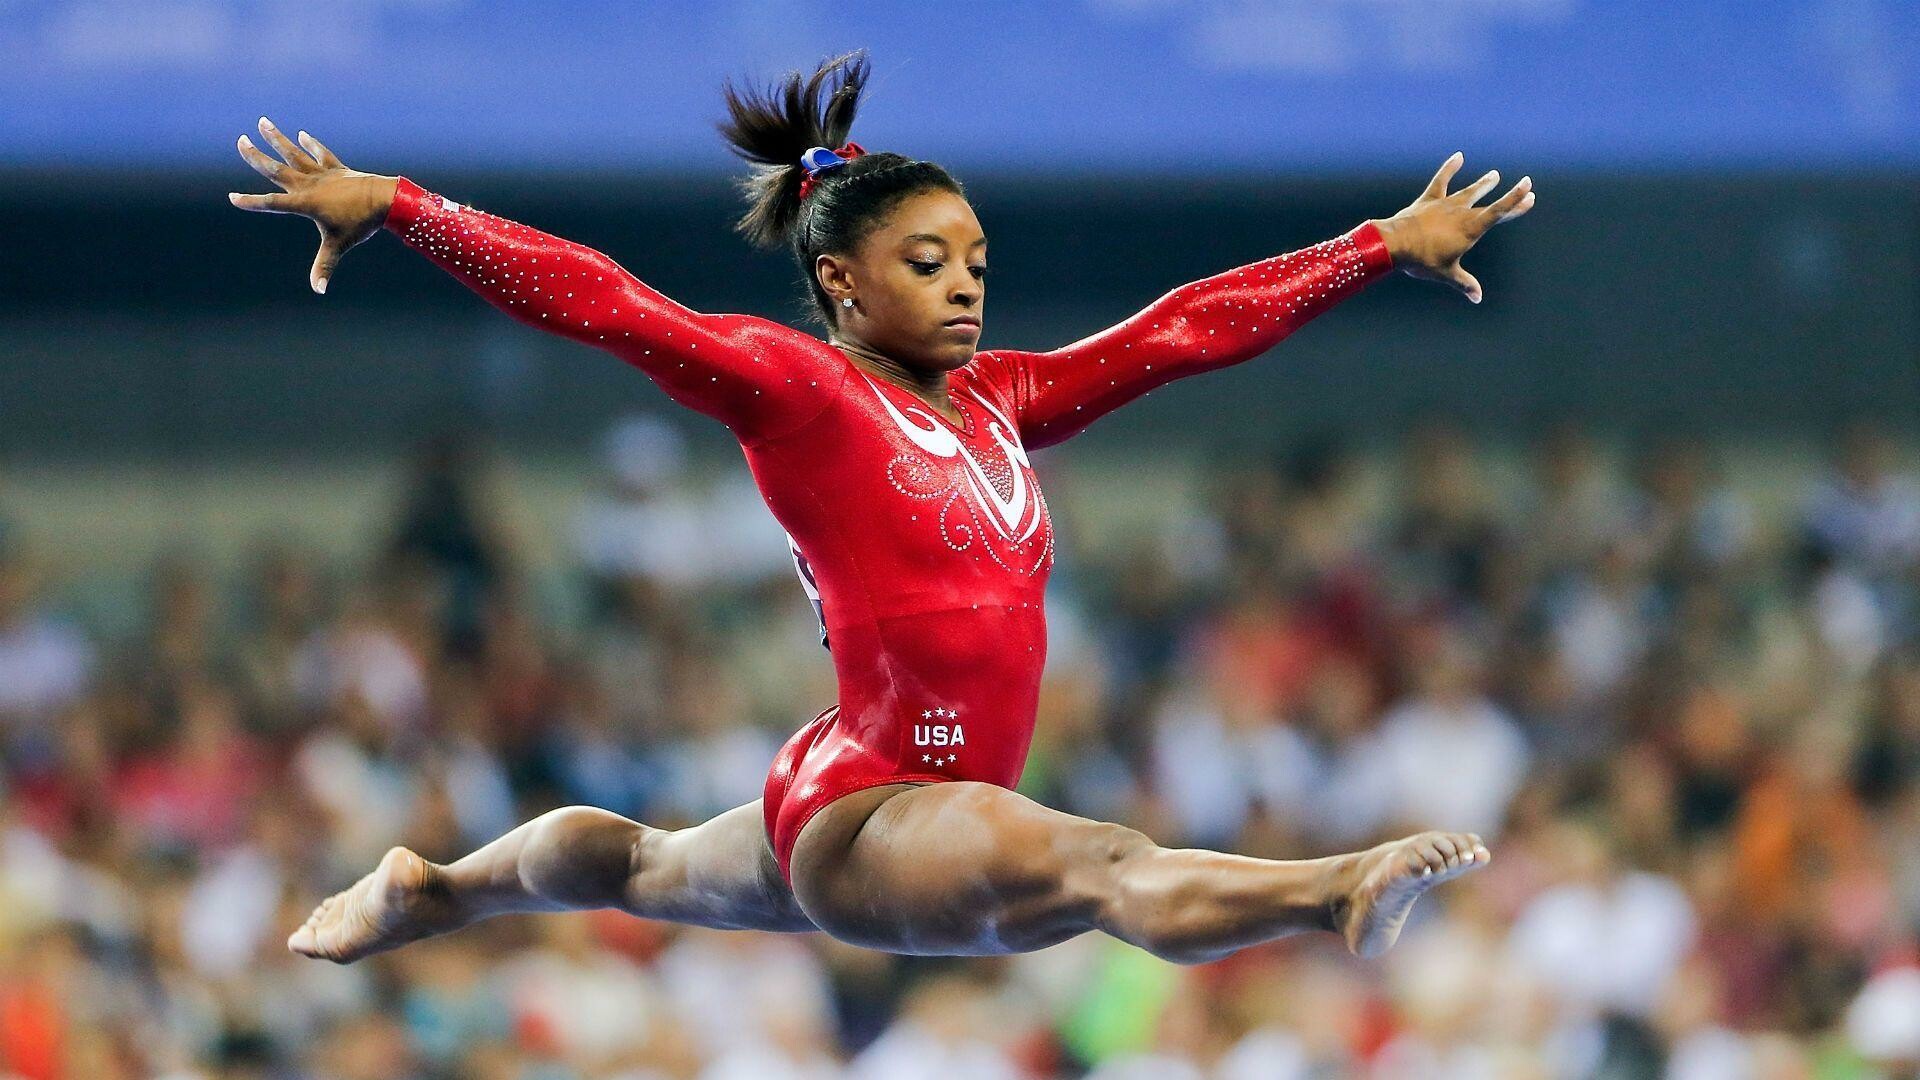 Simone Biles: She won the all-around title at the 2016 U.S. National Championships. 1920x1080 Full HD Wallpaper.